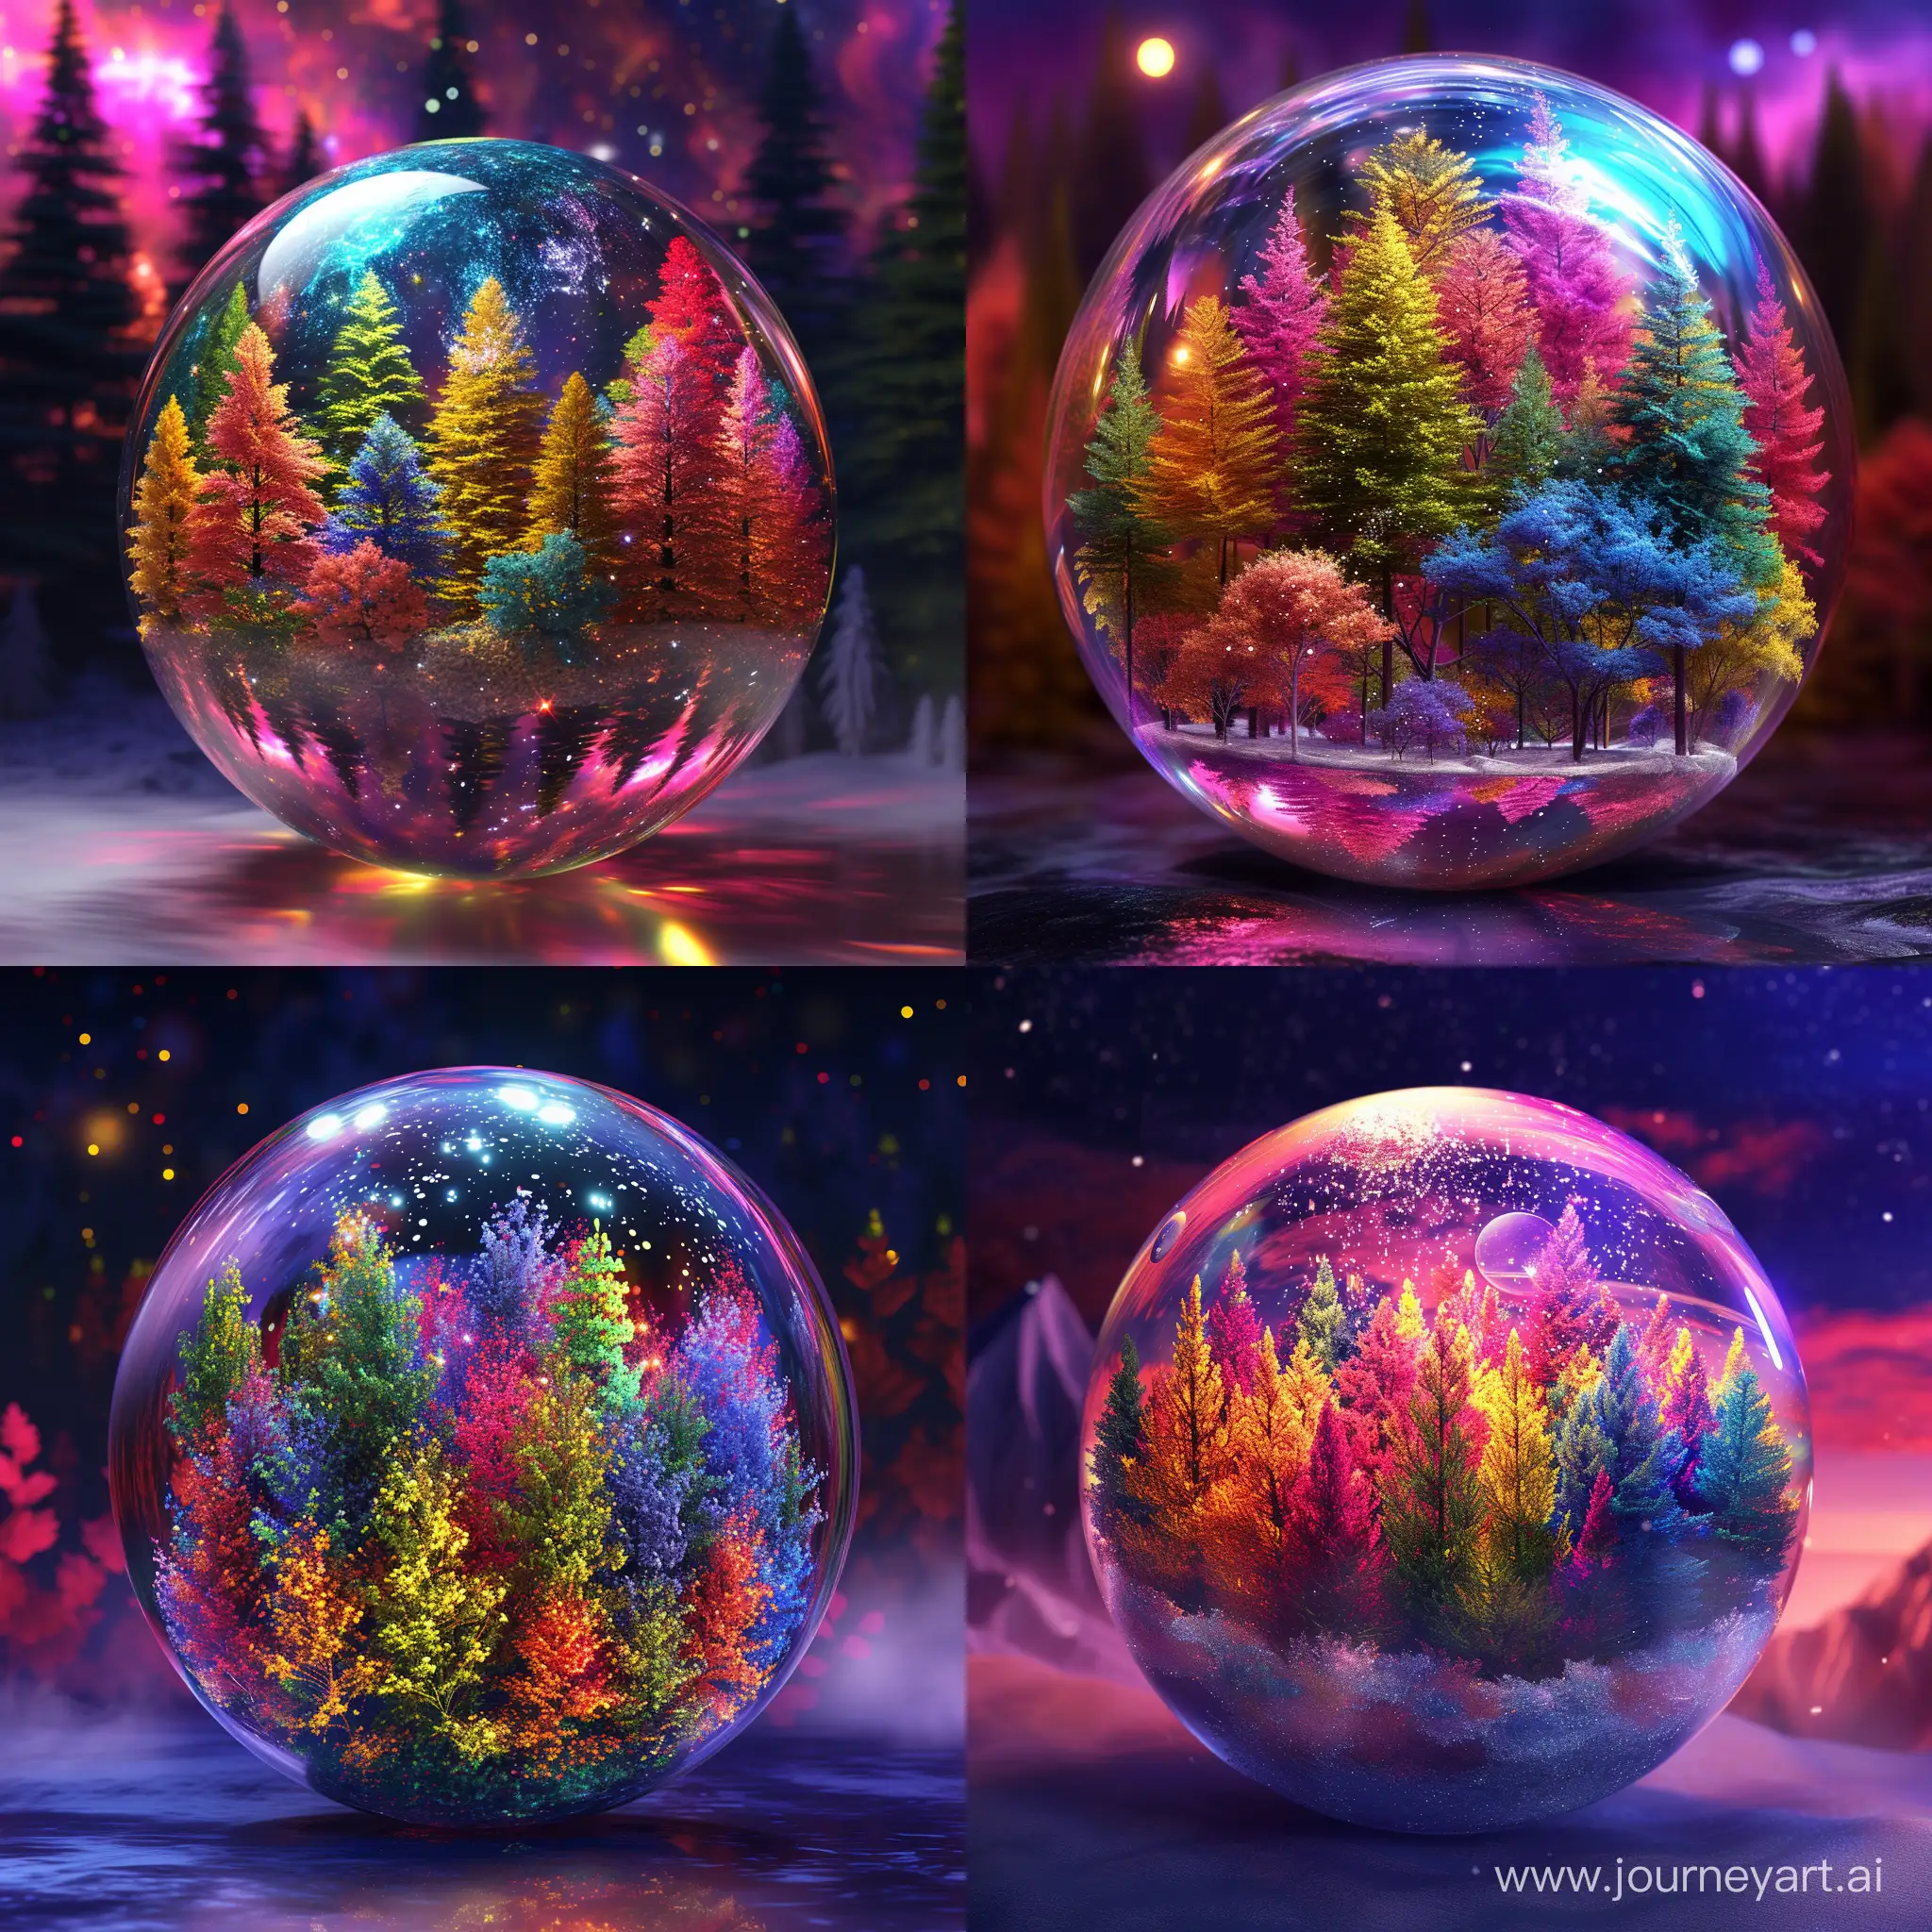 Enchanted-Crystal-Ball-Revealing-Lush-Colorful-Forest-at-Night